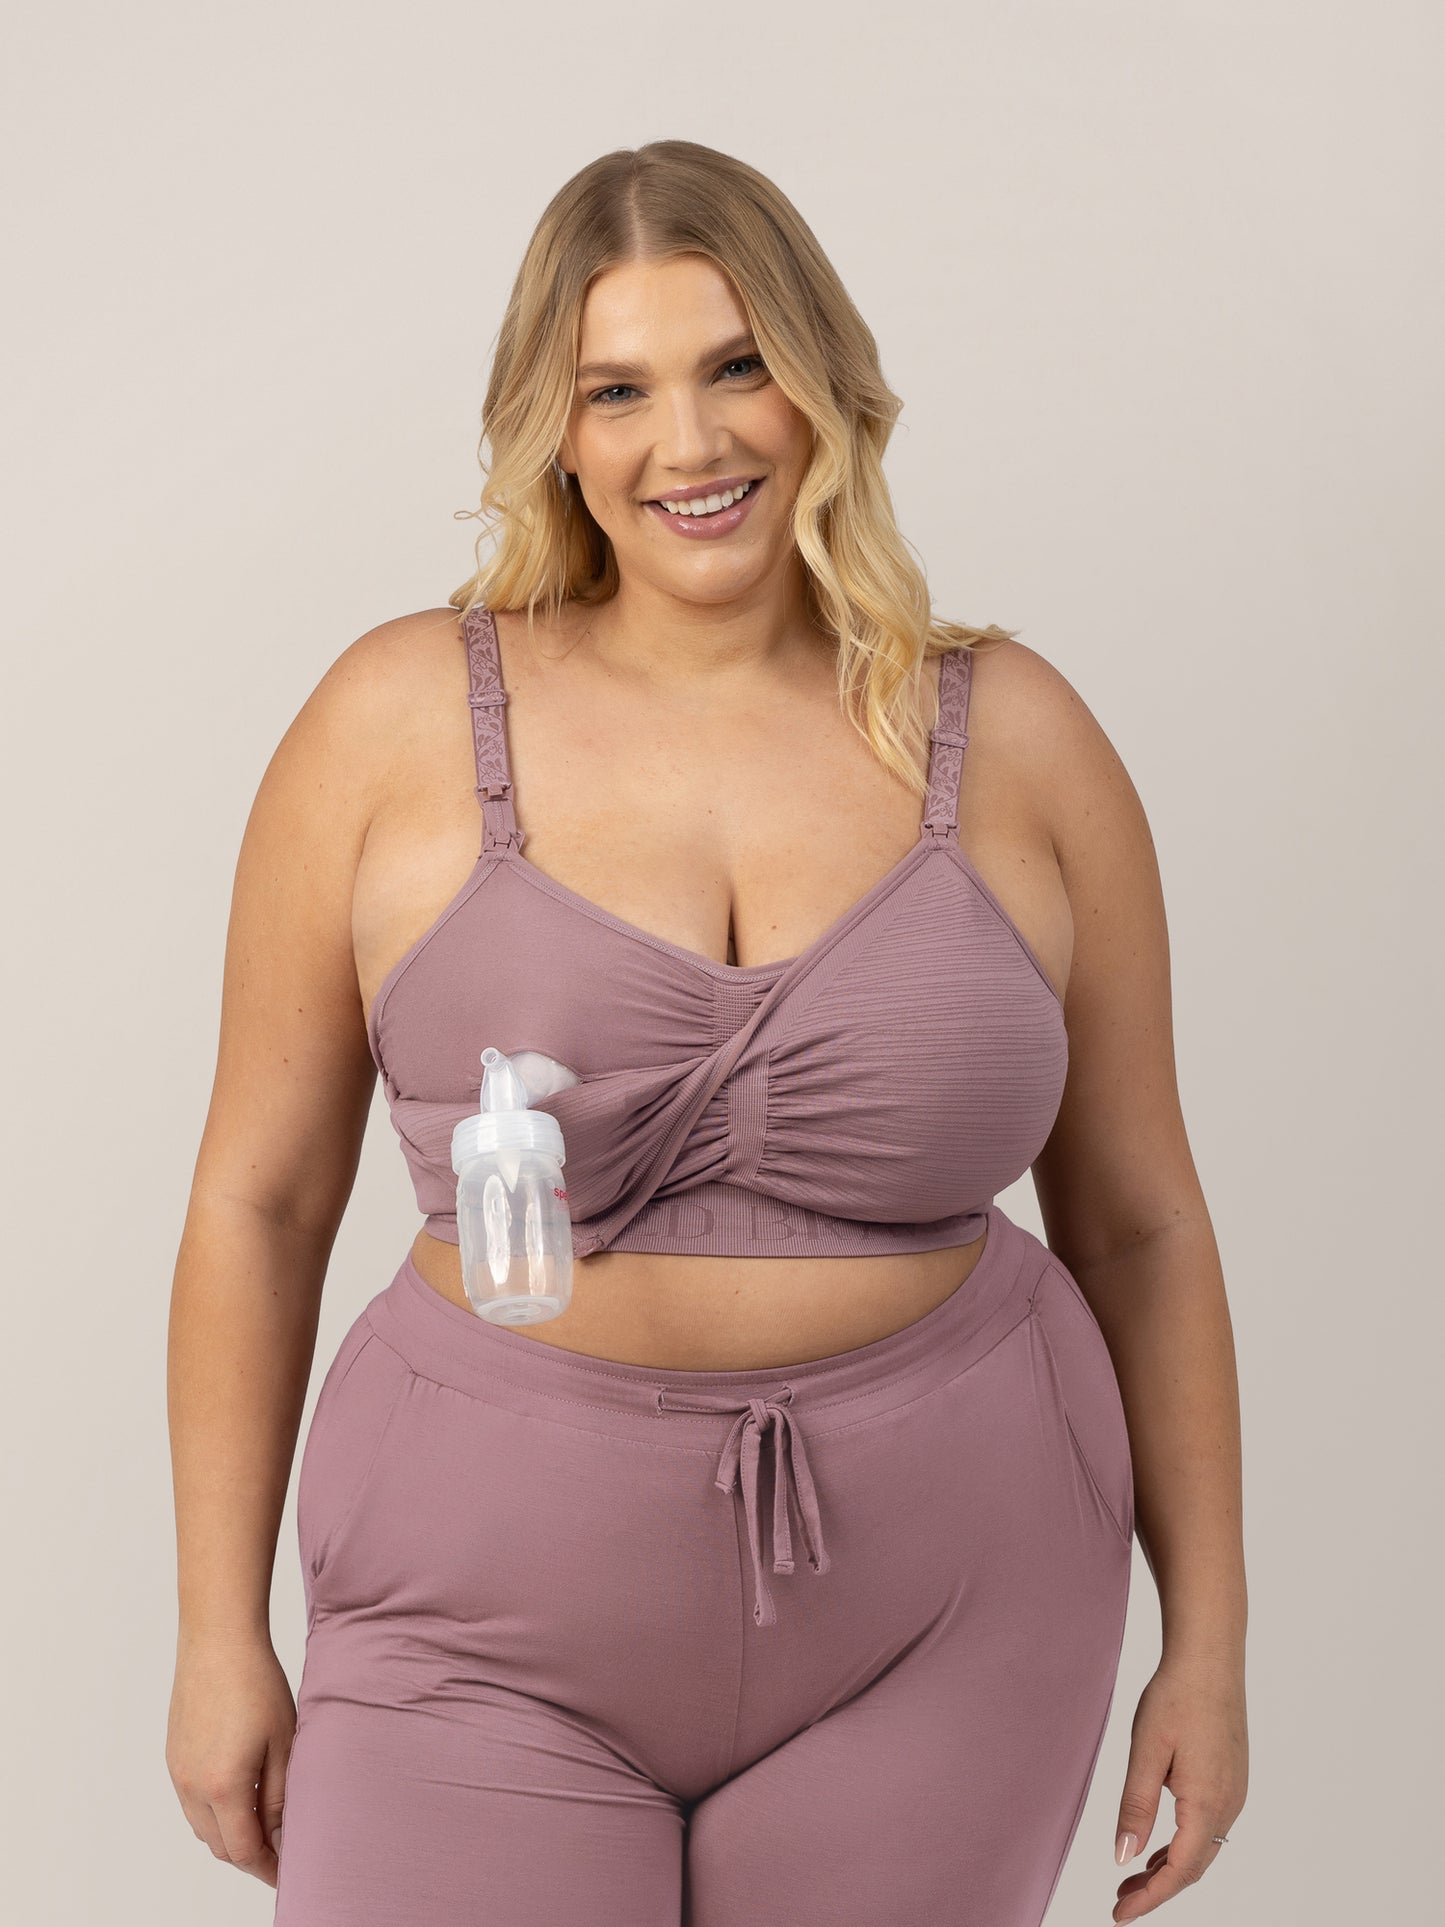 Model is wearing the Sublime® Hands-Free Pumping & Nursing Bra in Twilight connected to a pumping bottle